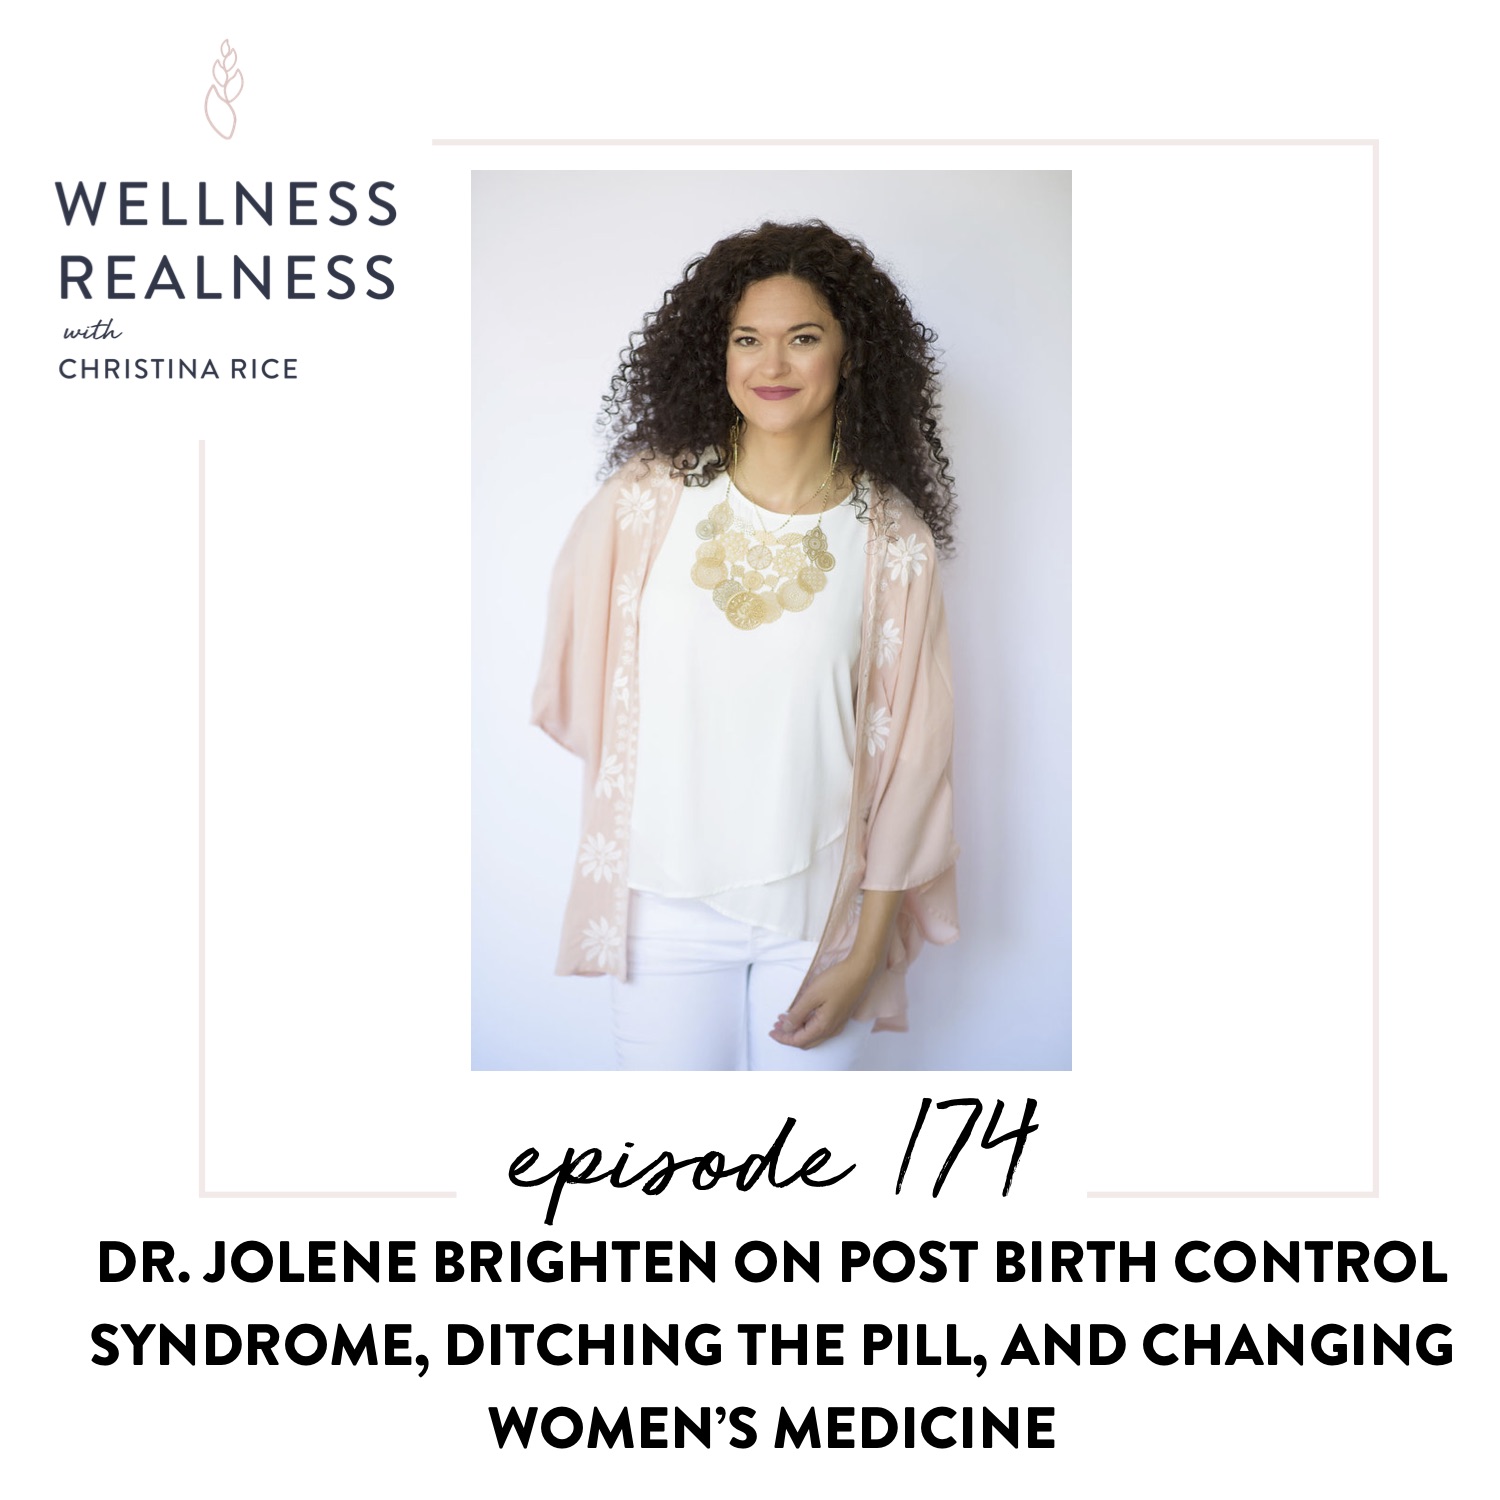 174: Dr. Jolene Brighten on Post Birth Control Syndrome, Ditching the Pill, and Changing Women’s Medicine